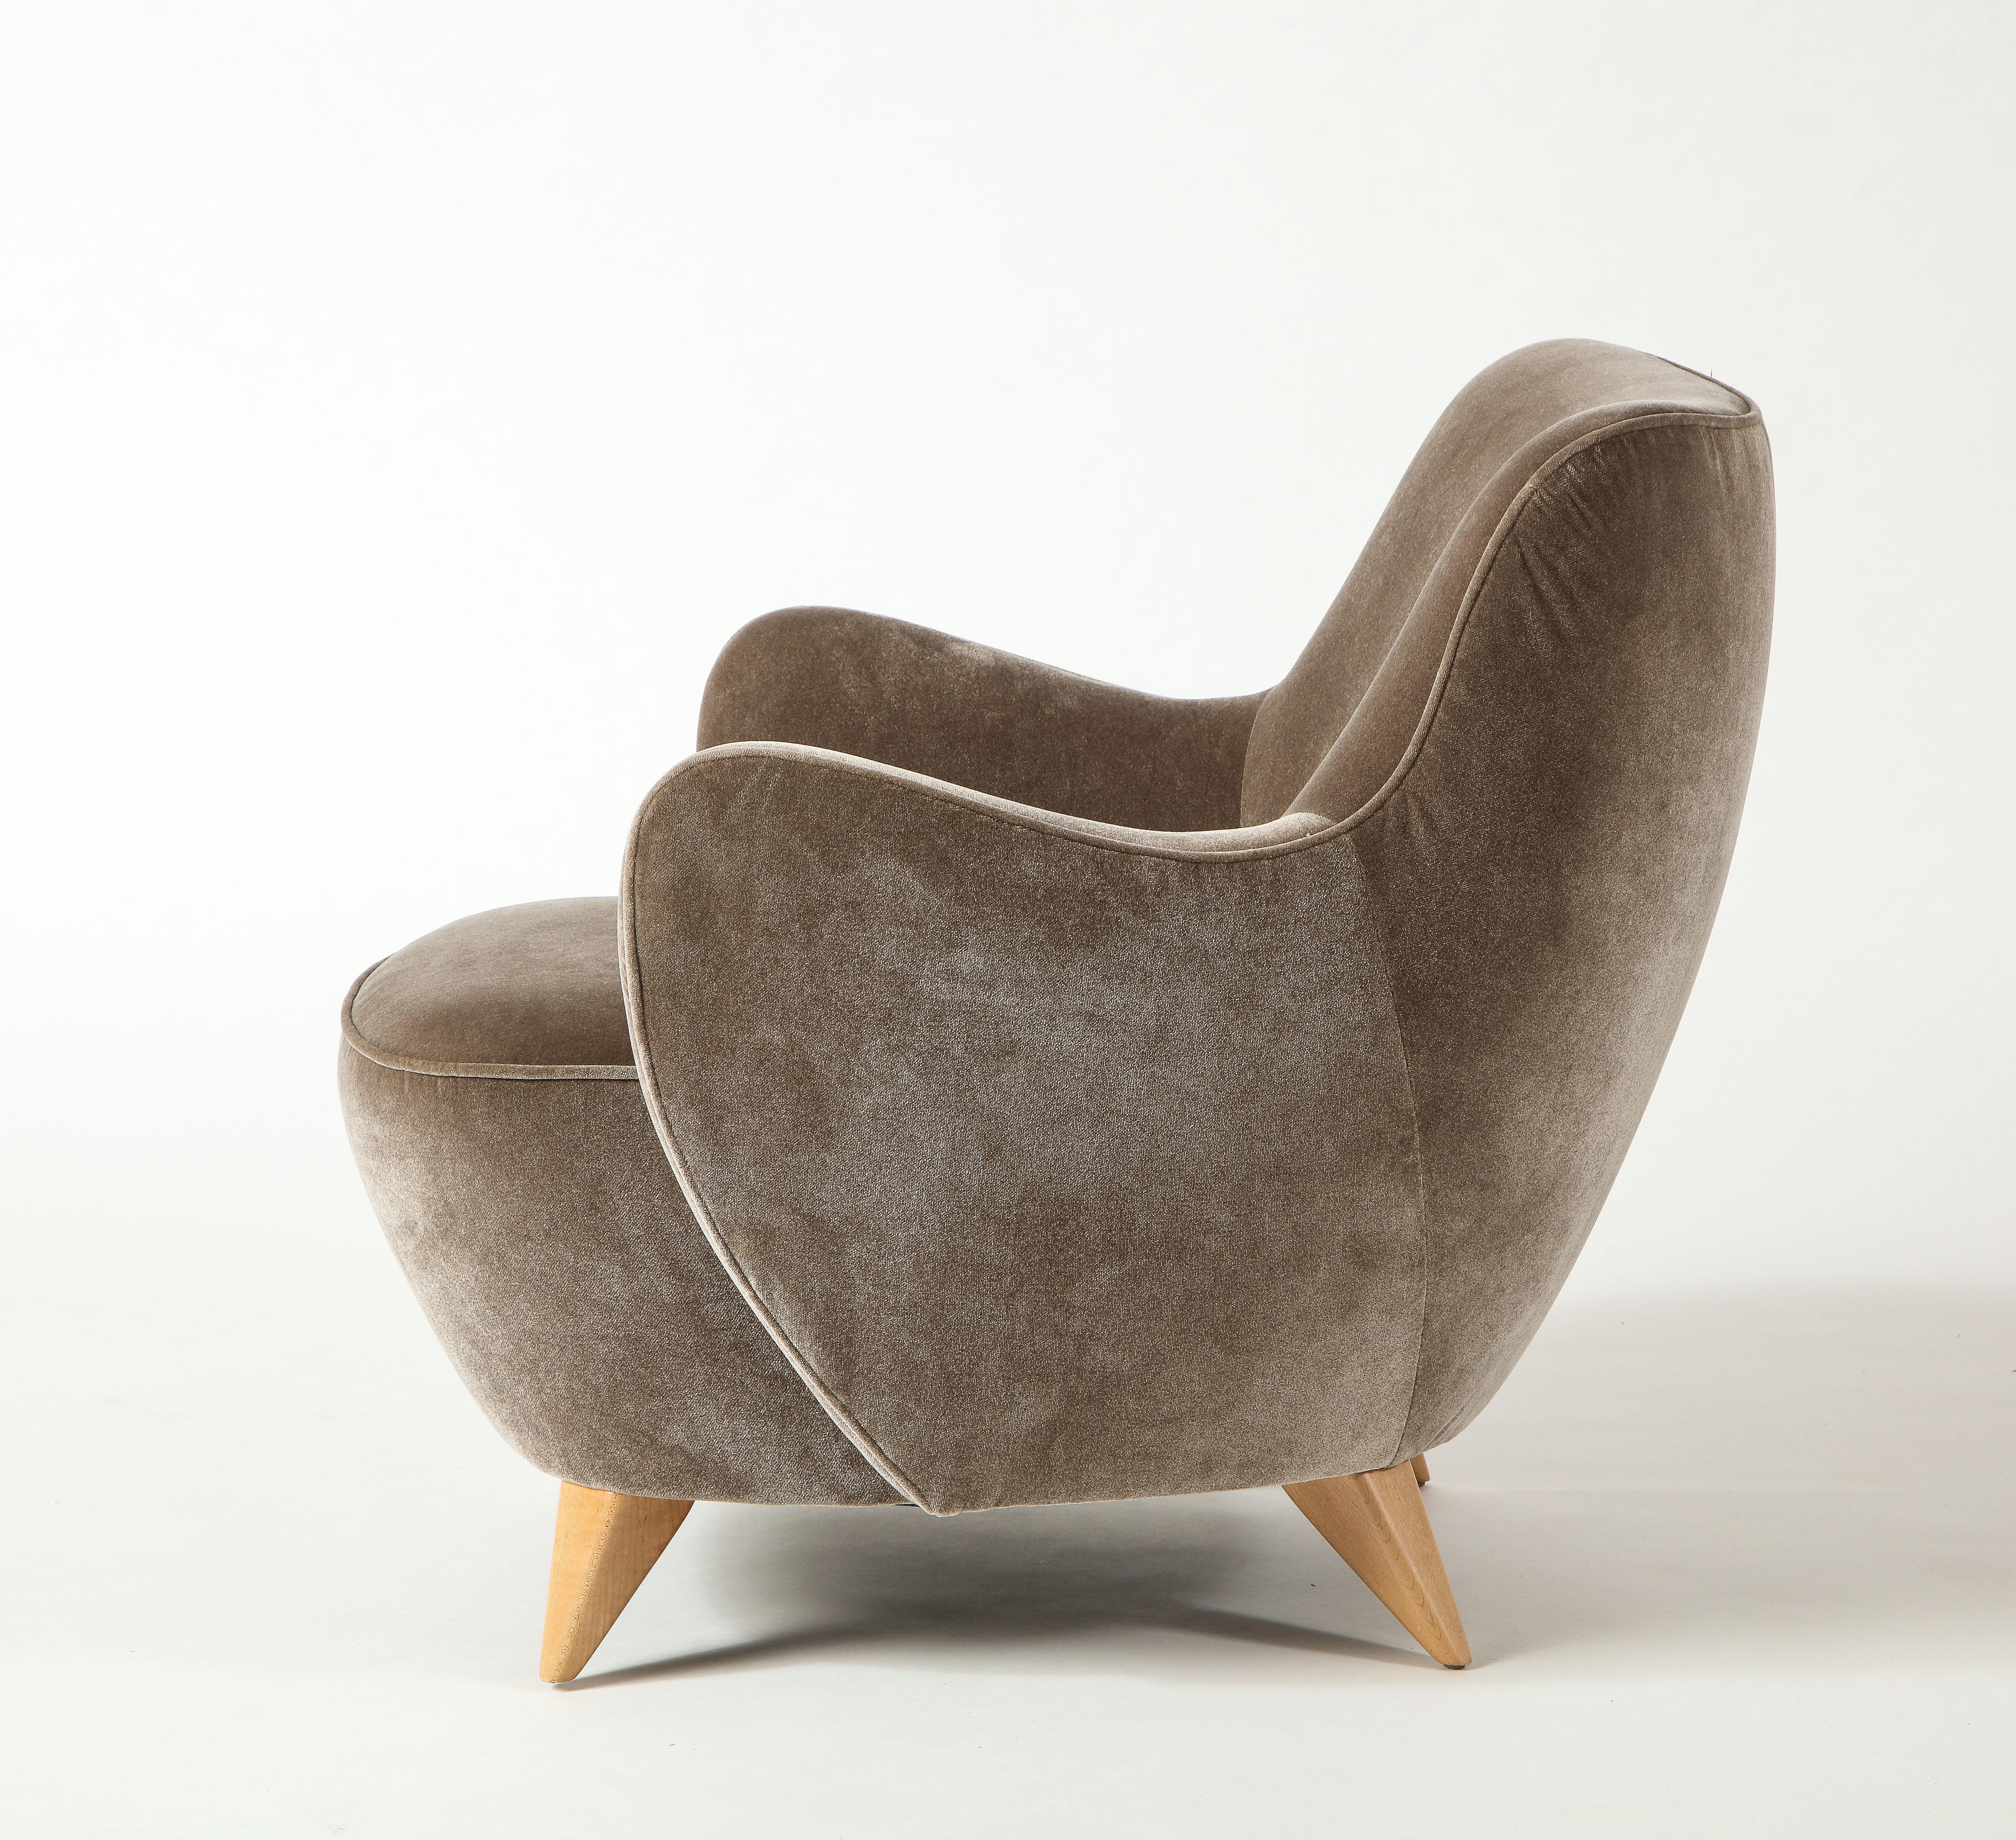 Modern Vladimir Kagan Barrel Chair in Beige Upholstery with Natural Maple Base